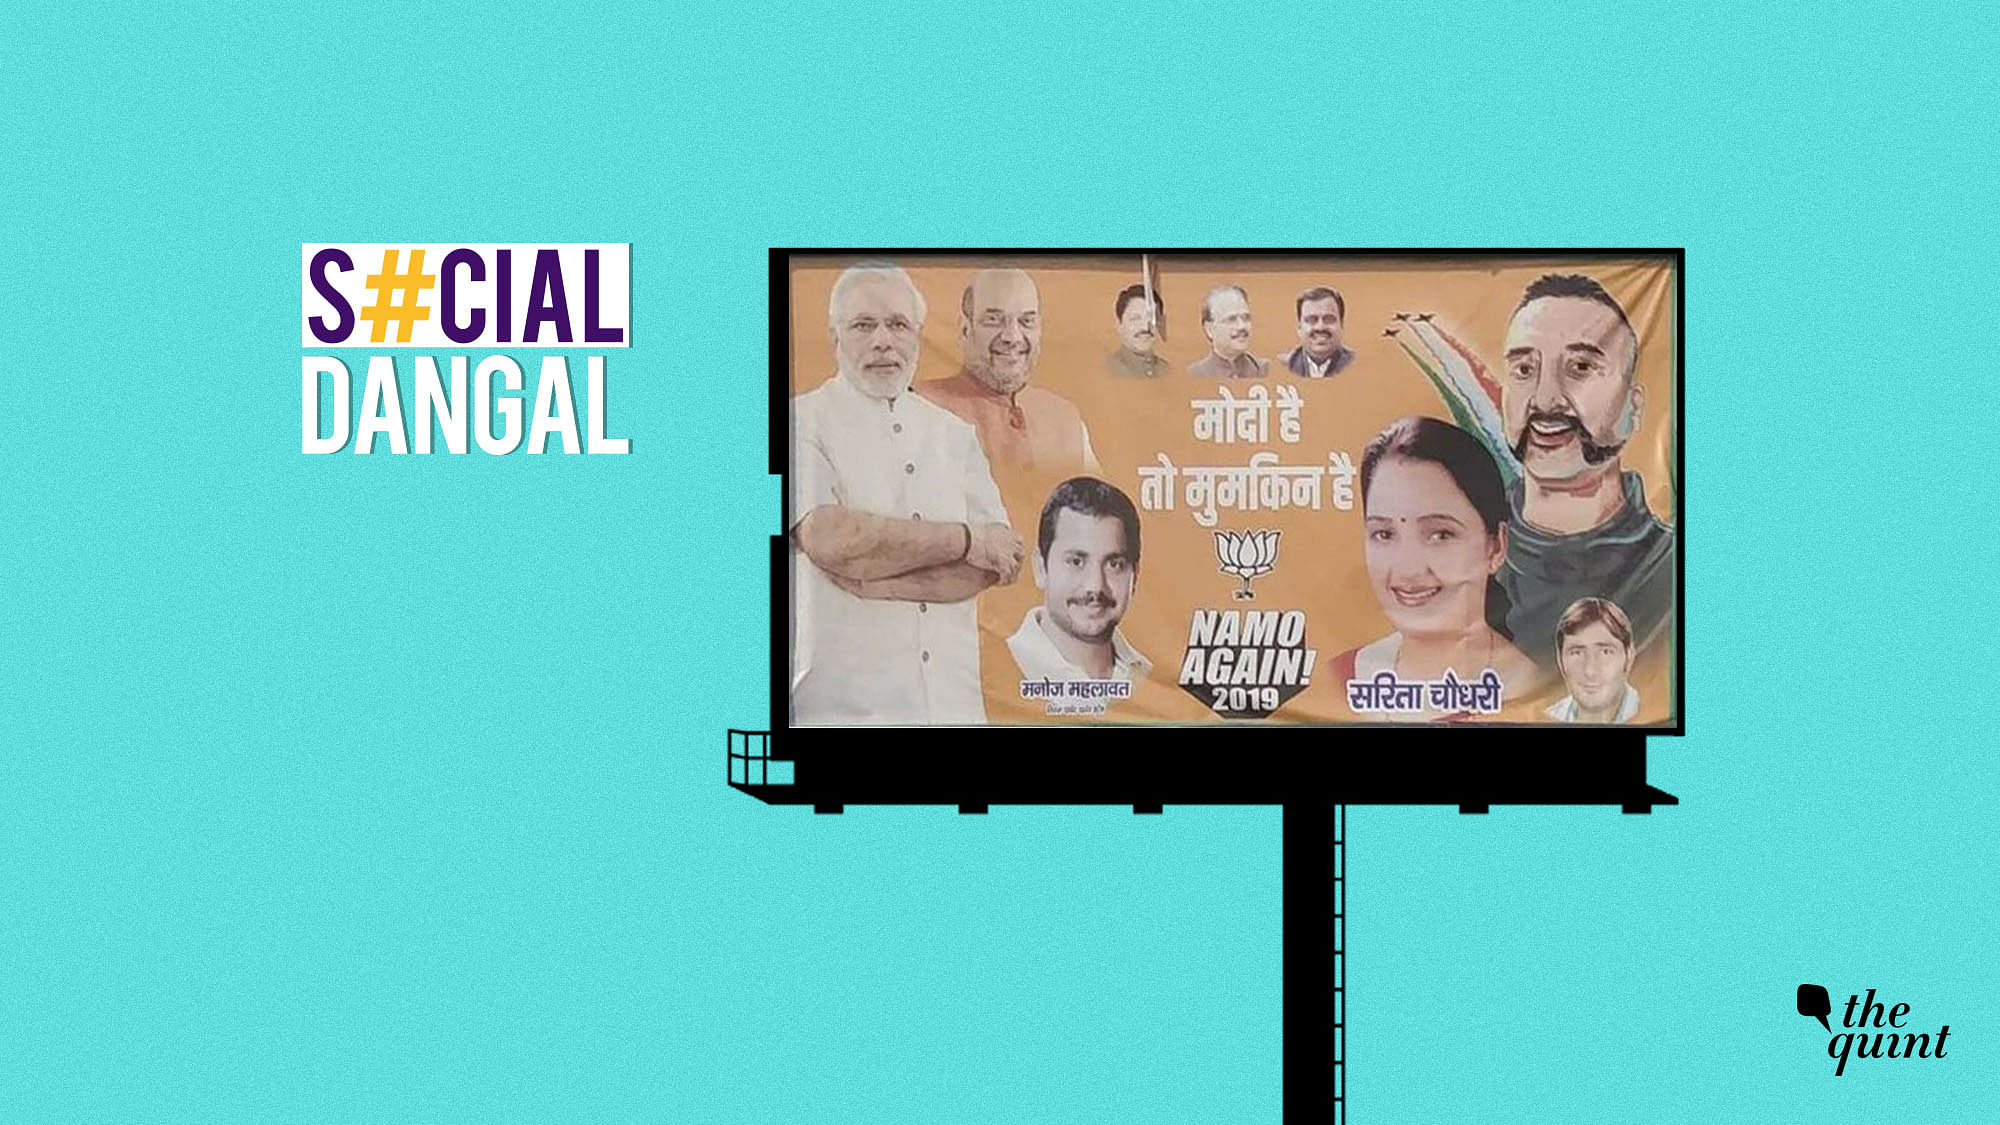 The BJP is being slammed by Twitterati for printing multiple political campaign posters with the photo of IAF Wing Commander Abhinandan Varthaman.&nbsp;